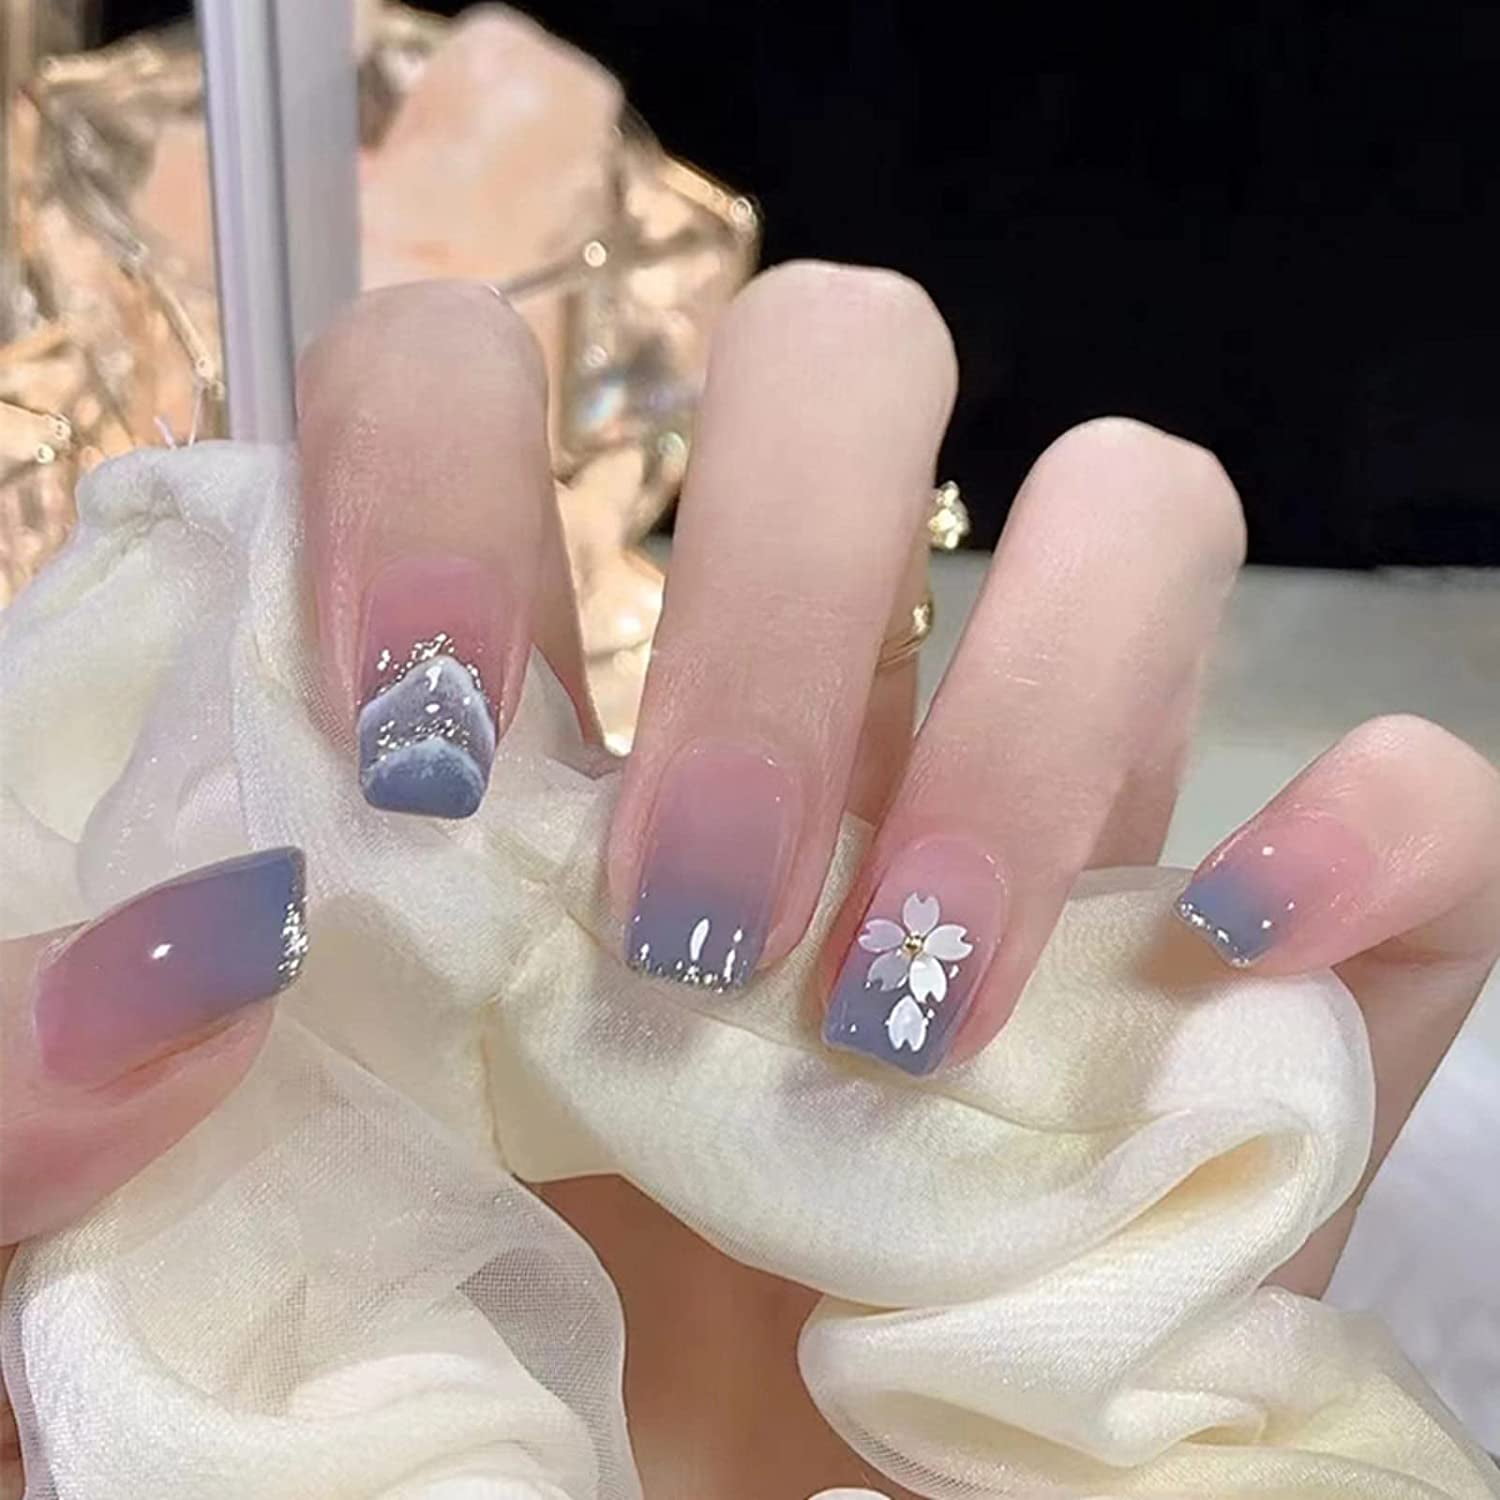 ♥︎CUTE SHORT NAILS INSPO♡︎ 𝐏𝐓 𝟐 | Gallery posted by whos.cece | Lemon8